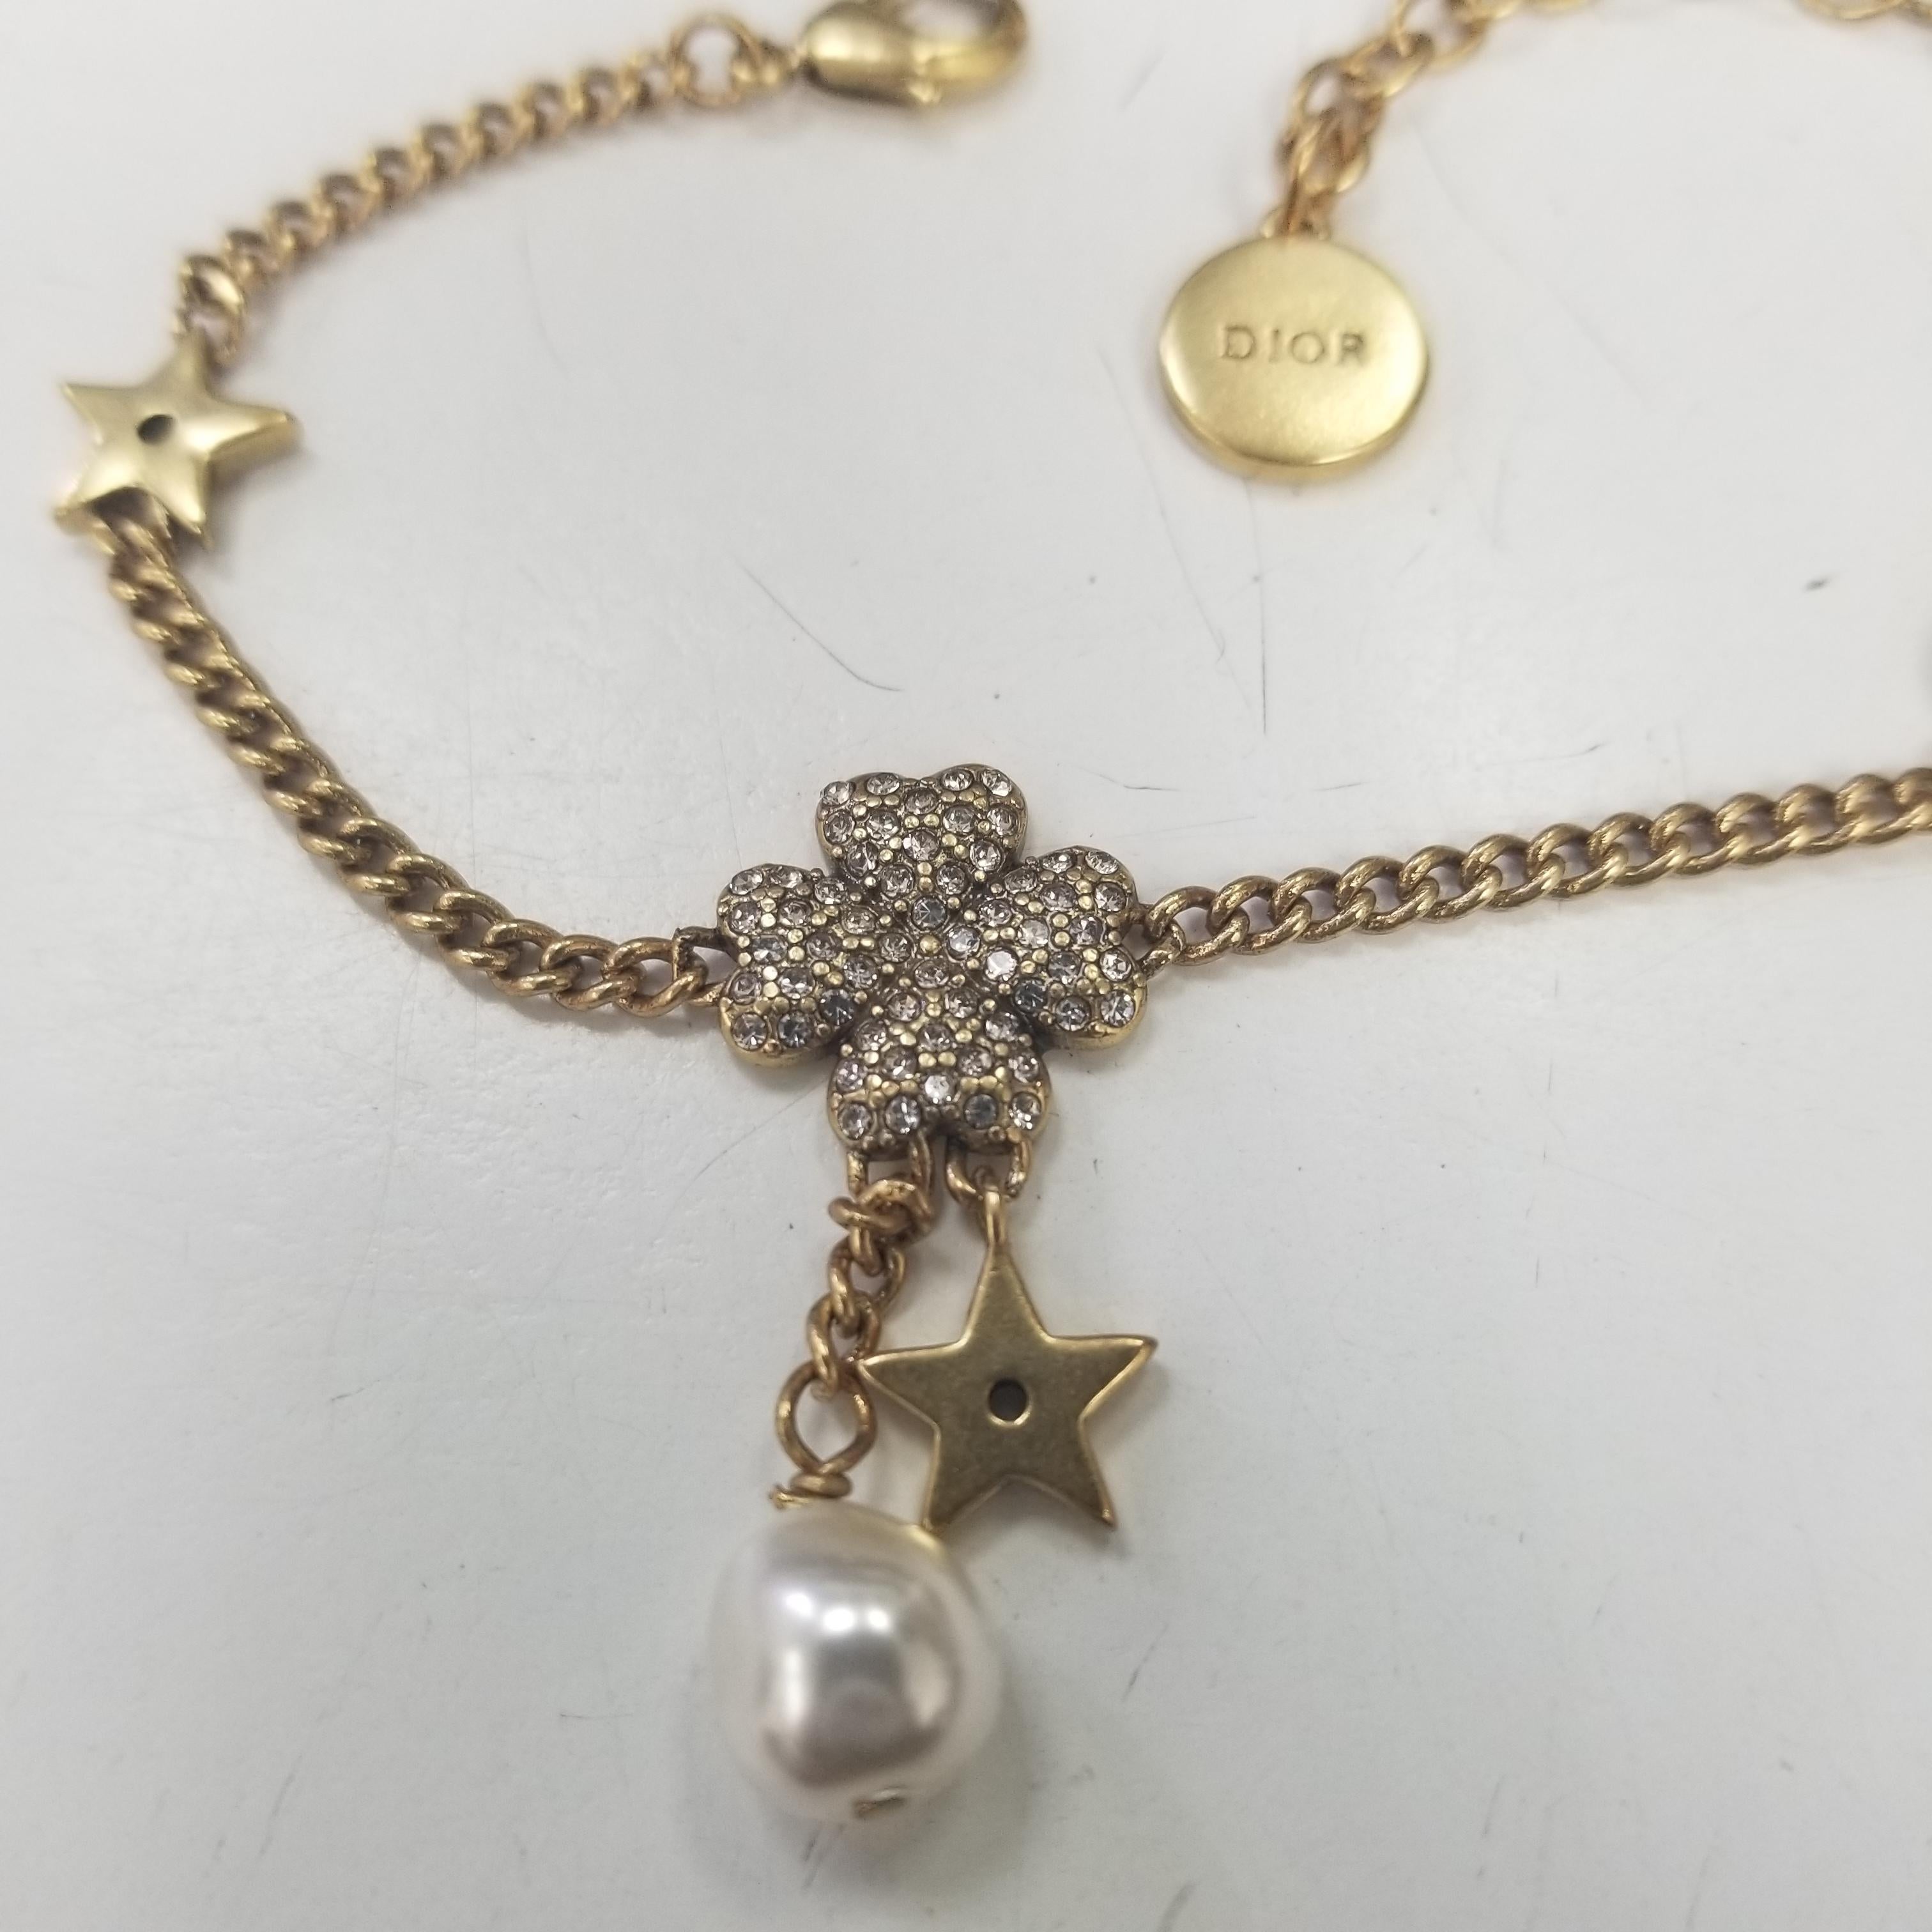 Christian Dior Bracelet with clover, pearl and star in Gold with Adjustable Chain